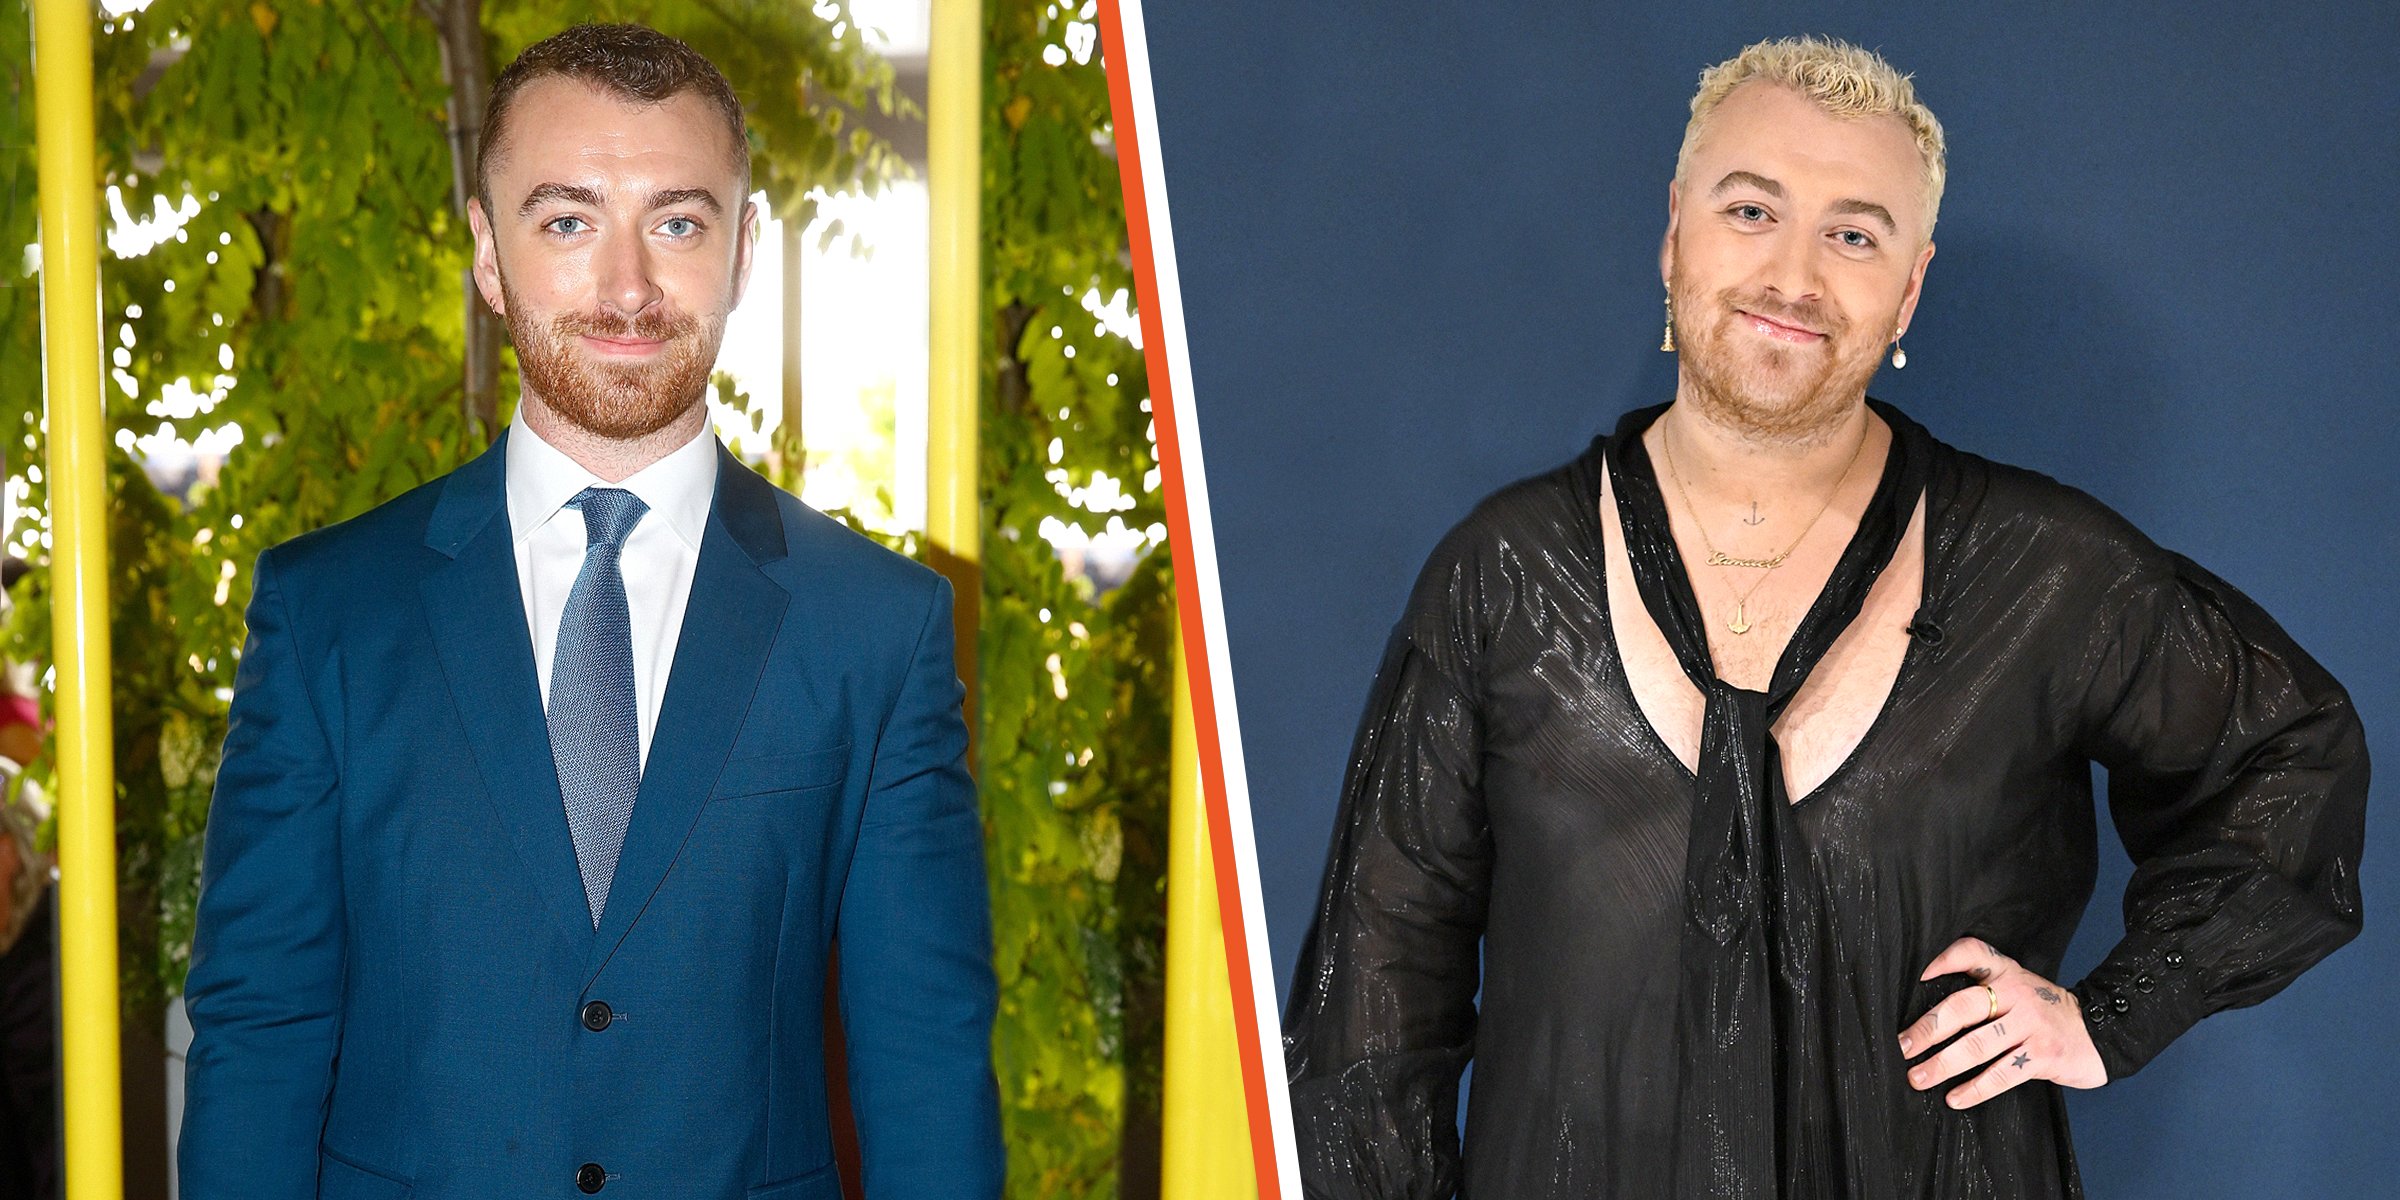 Singer Sam Smith | Source: Getty Images